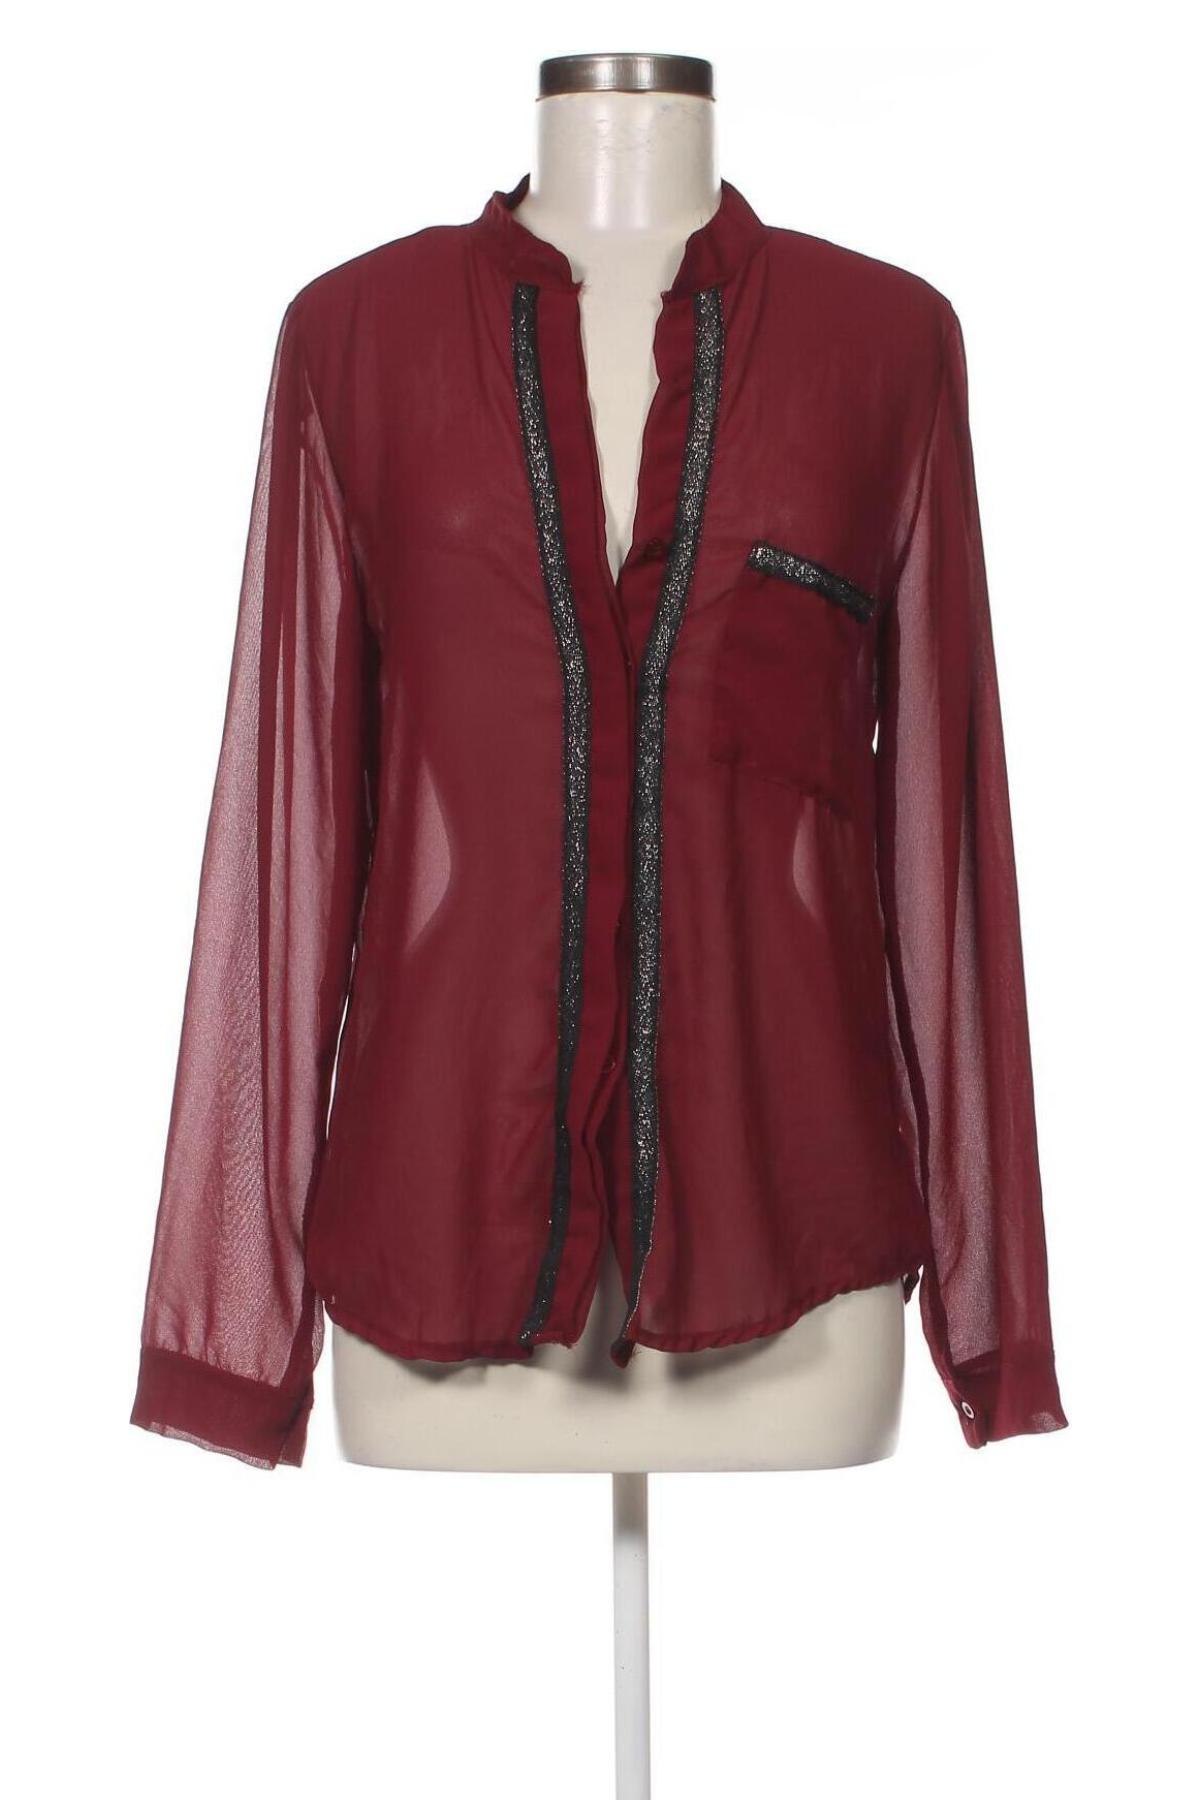 Damenbluse Made In Italy, Größe S, Farbe Rot, Preis 23,81 €